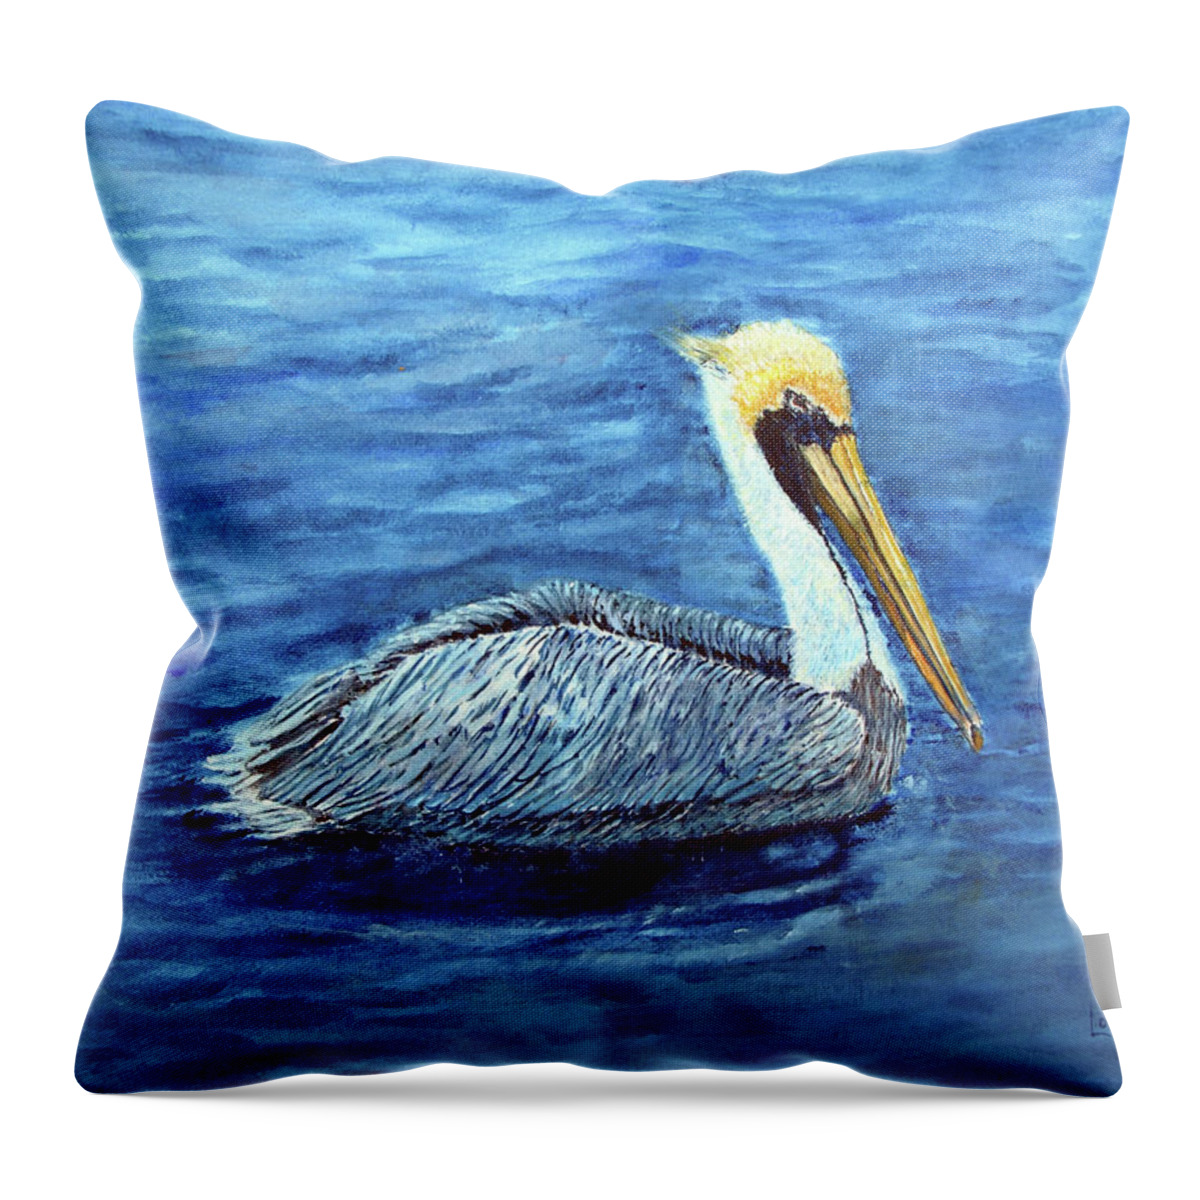 Brown Pelican Throw Pillow featuring the painting Pelican by Loretta Luglio